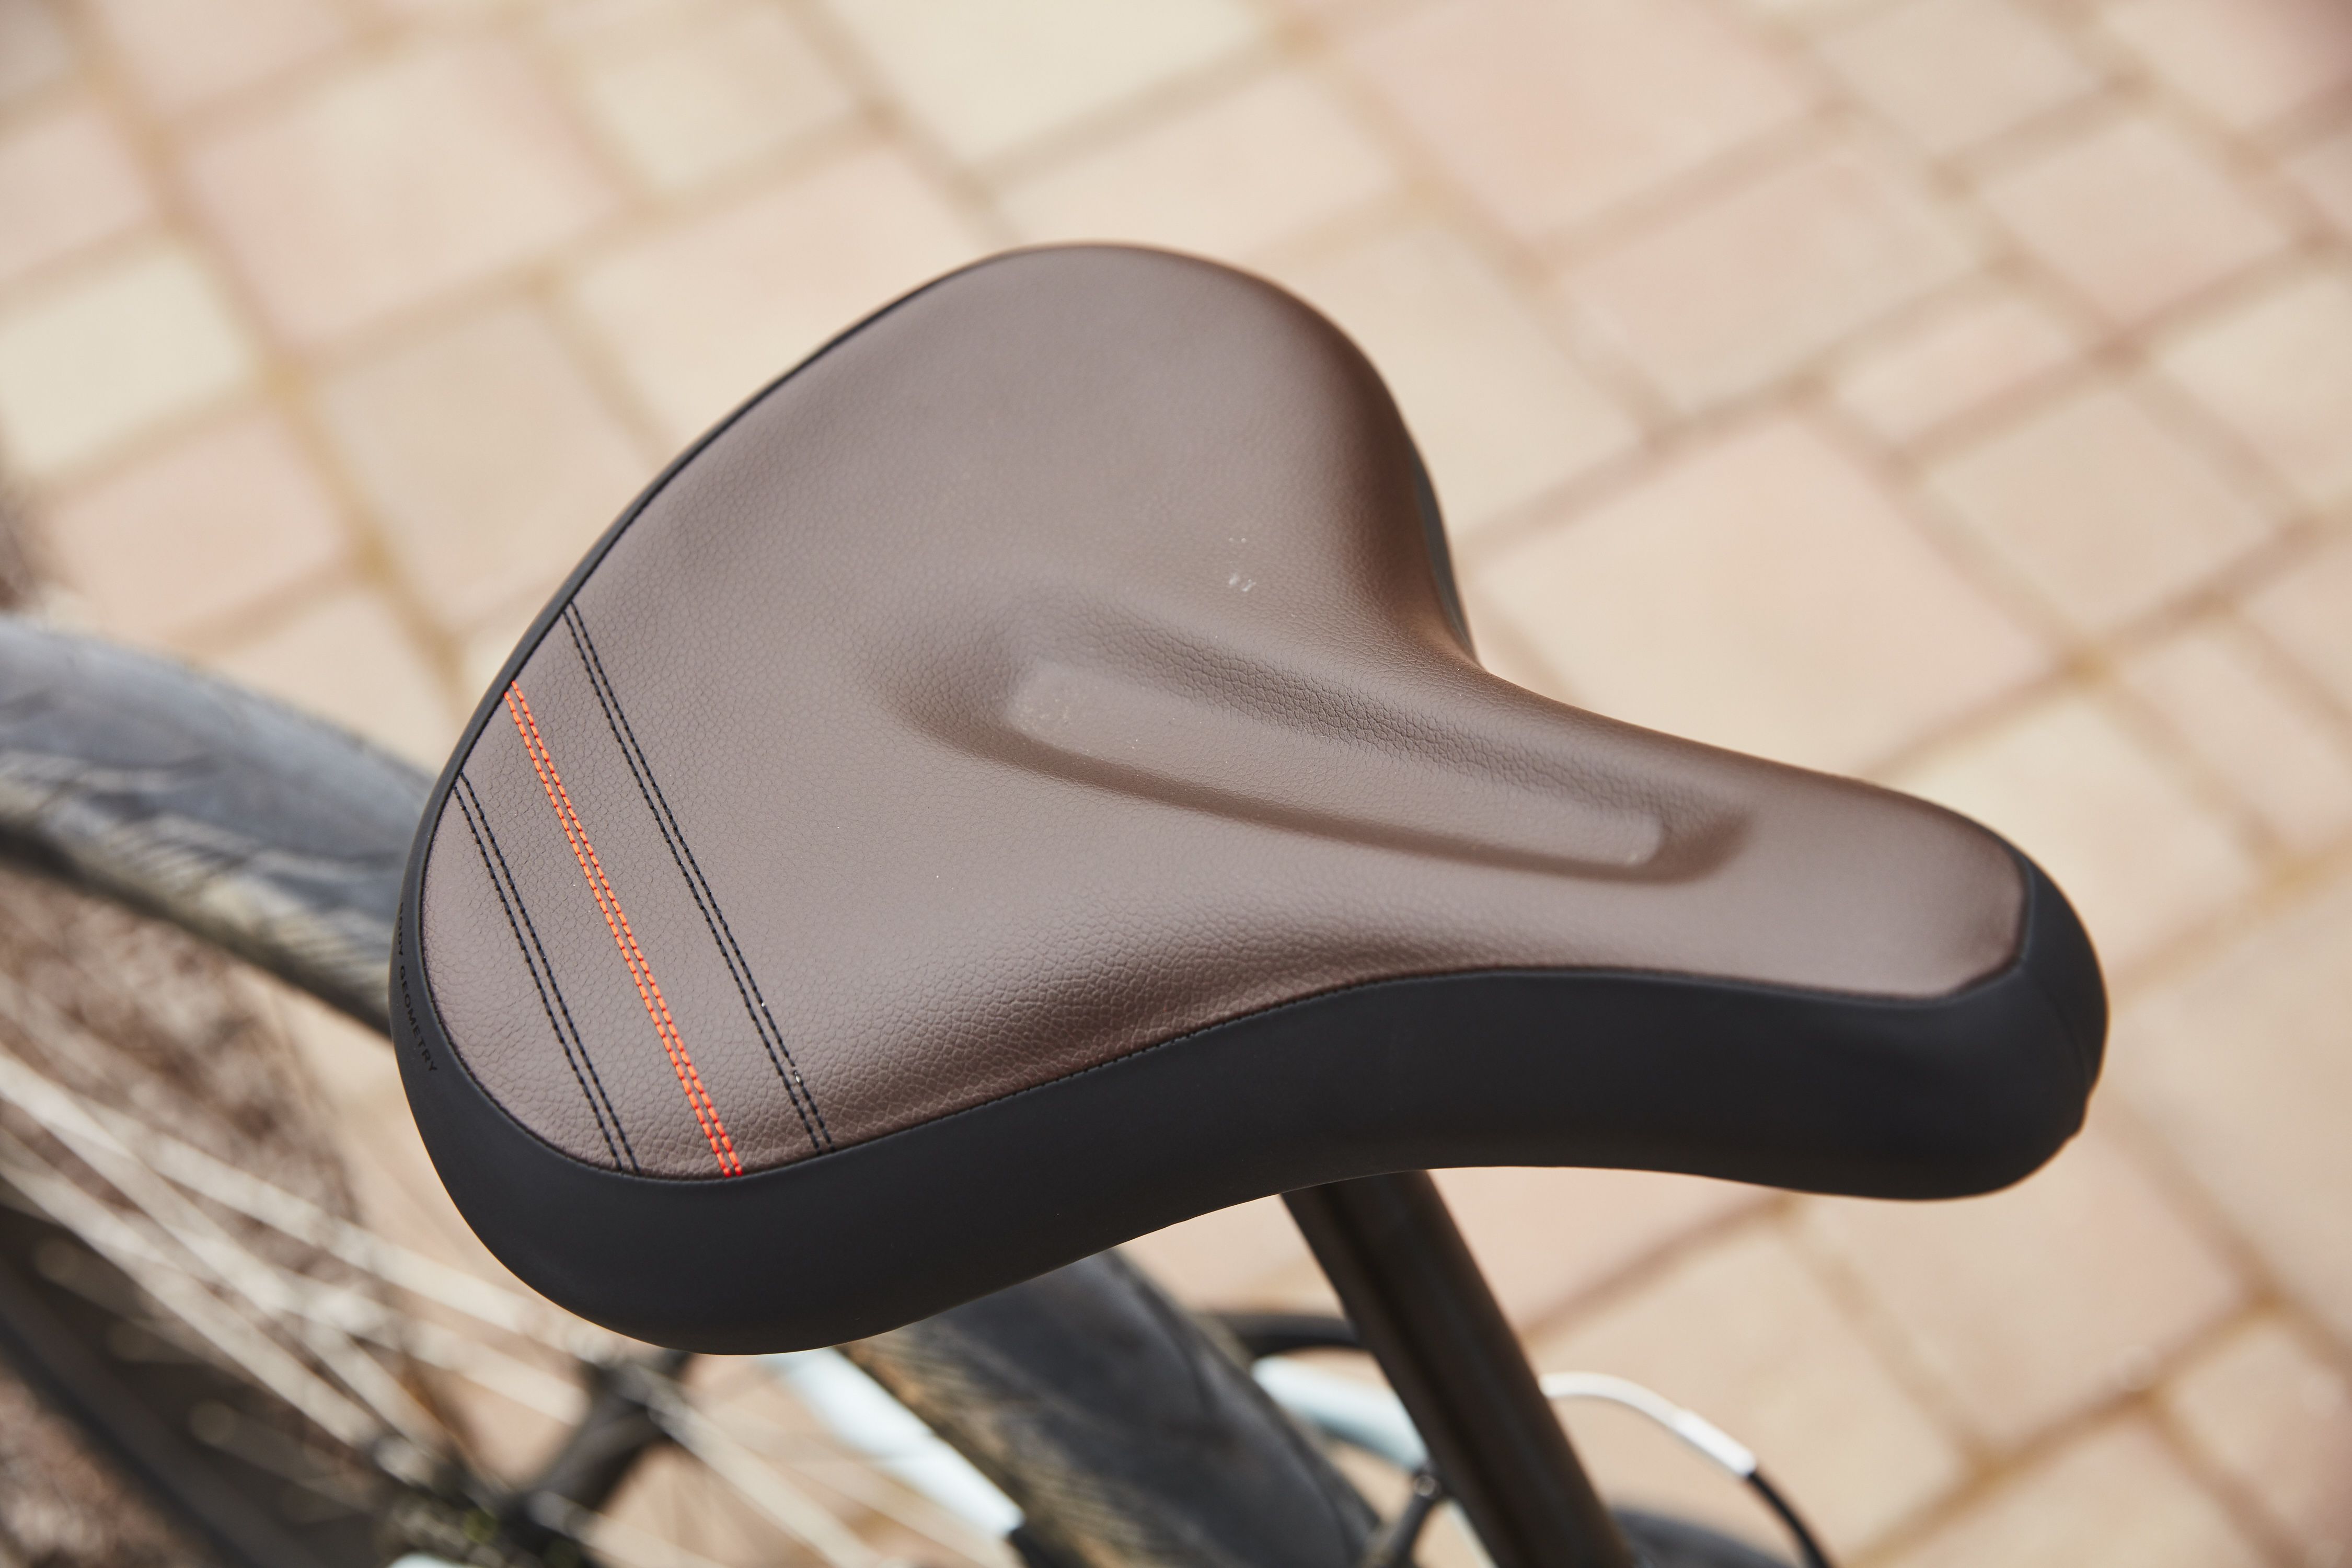 The Cup saddle on the Specialized Roll